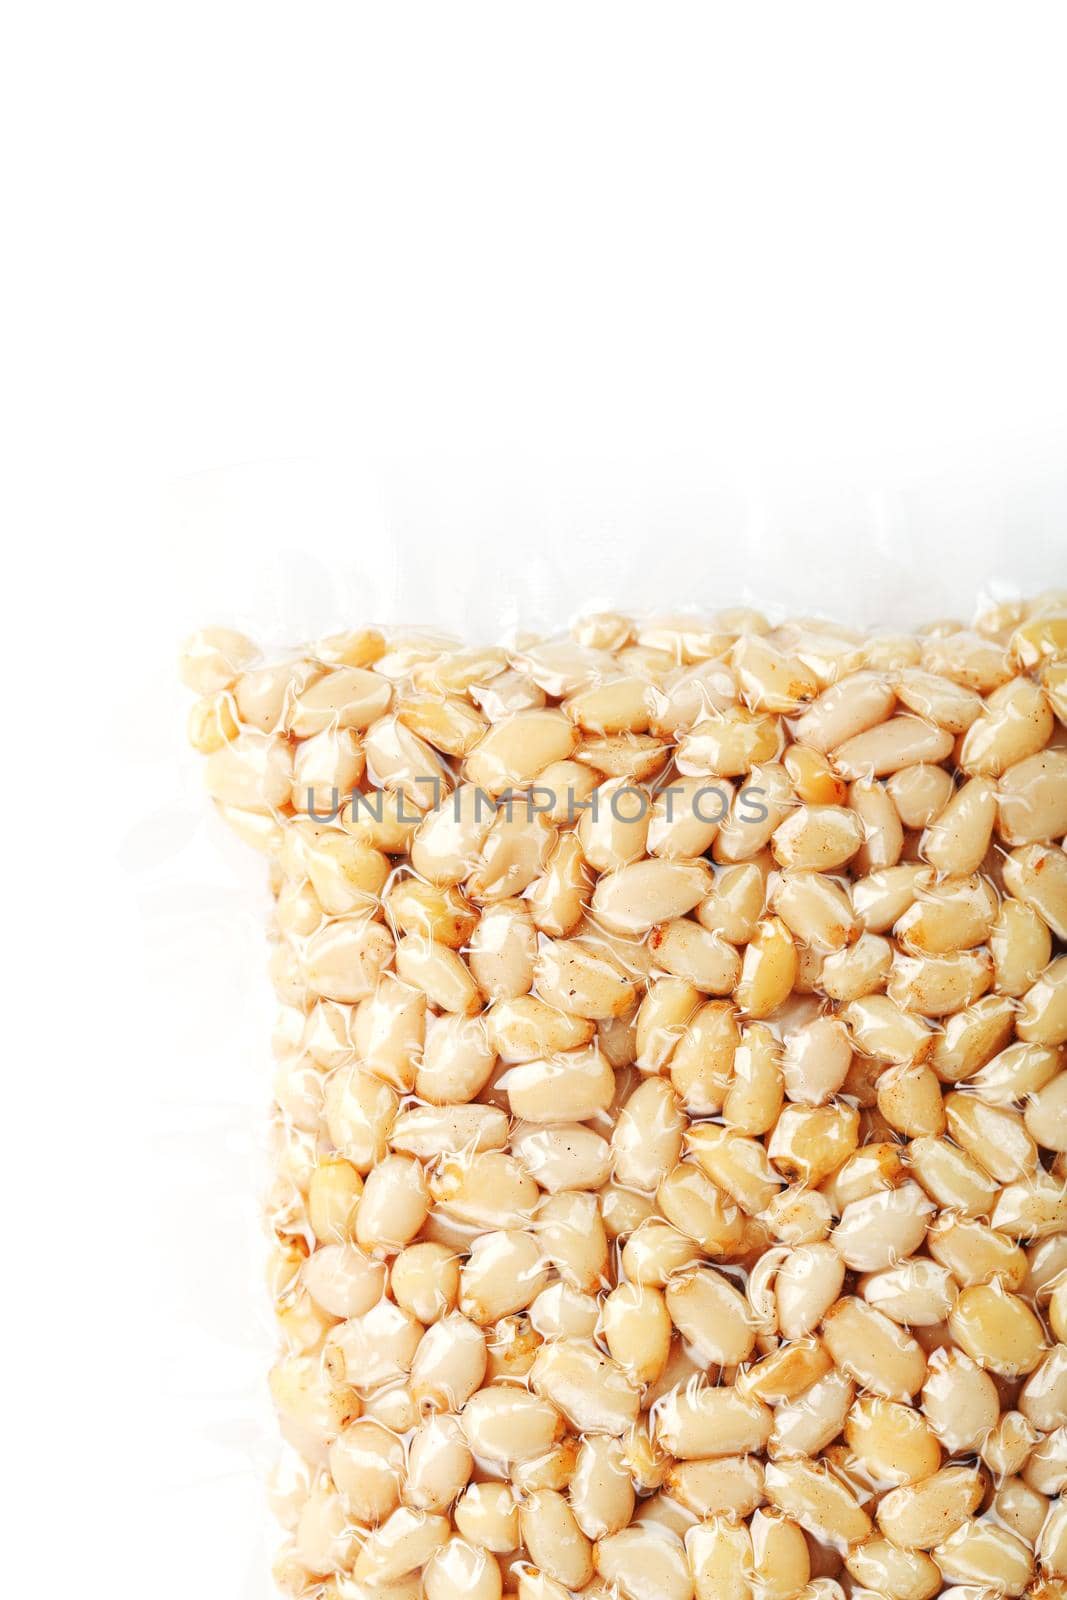 Kernels of peeled pine nuts in vacuum packaging on a white background with free space